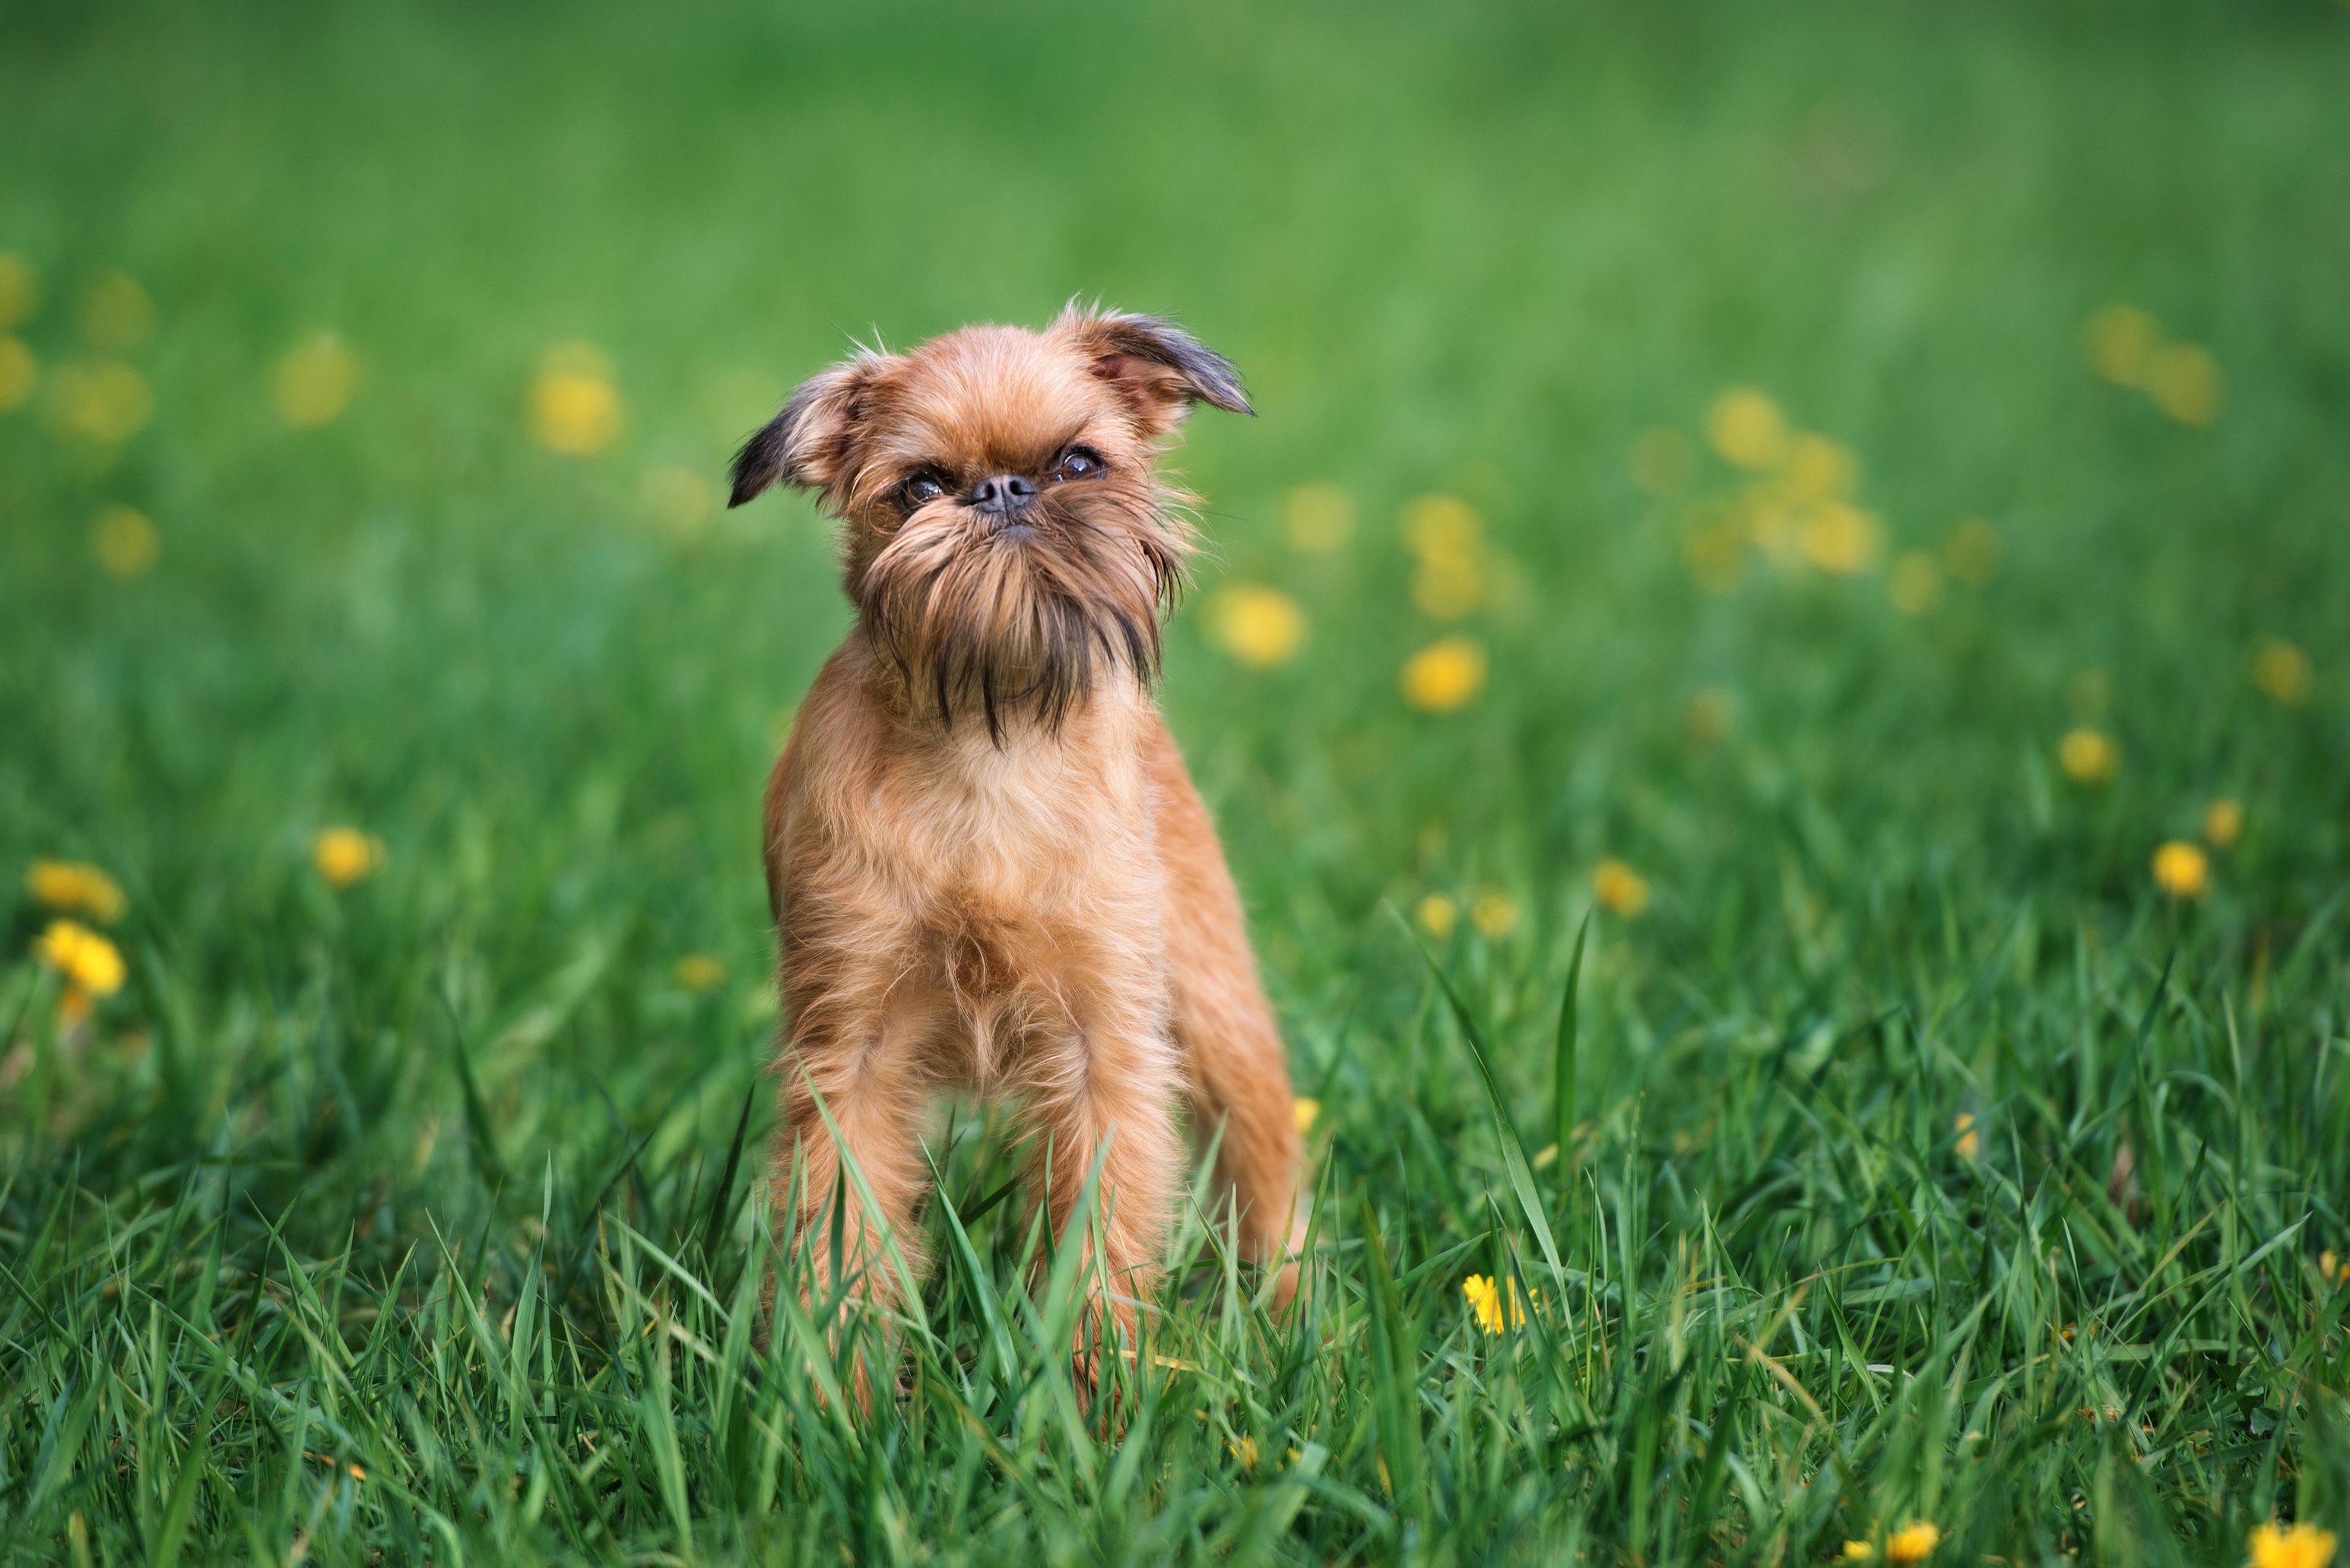 brown brussels griffon dog standing in grass and head tilted